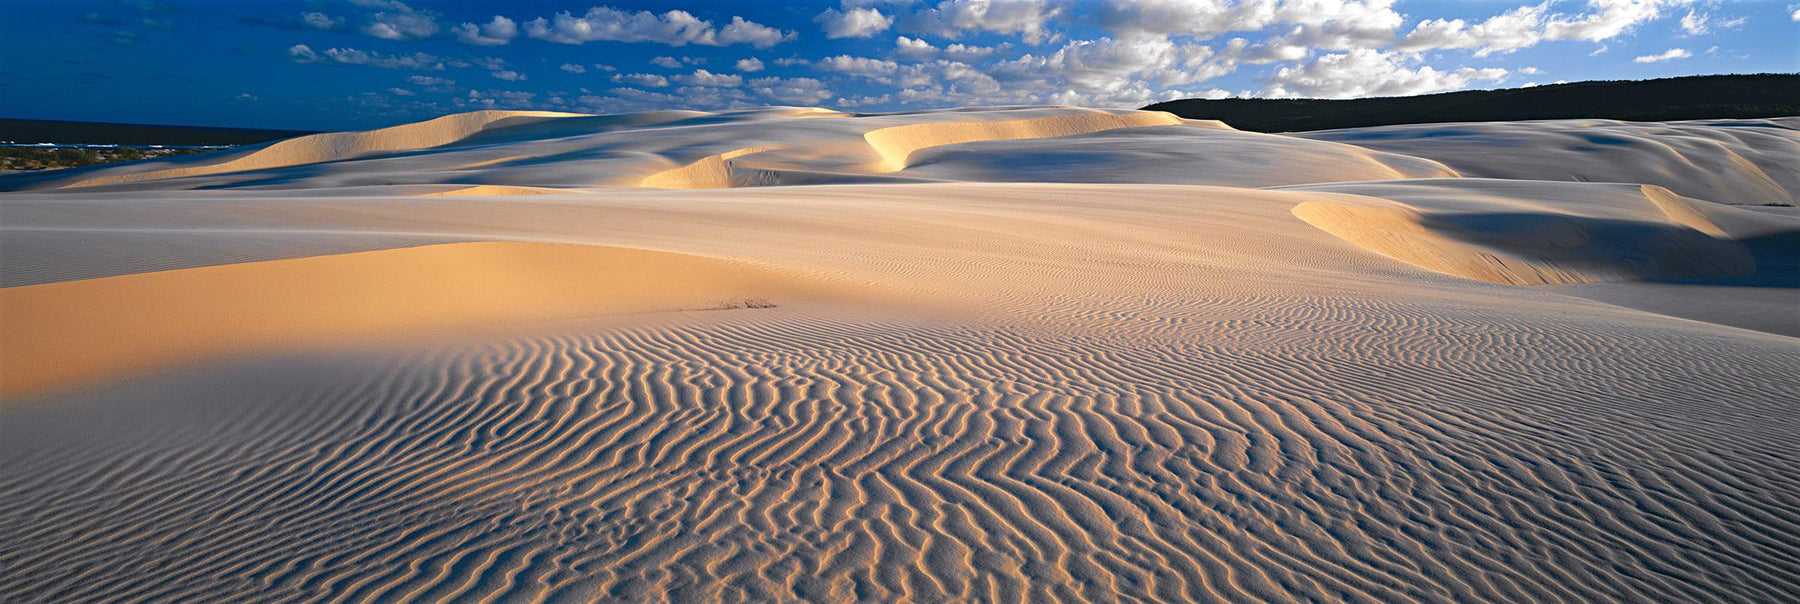 Sand dunes in front of a cloudy blue sky on Fraser Island Australia